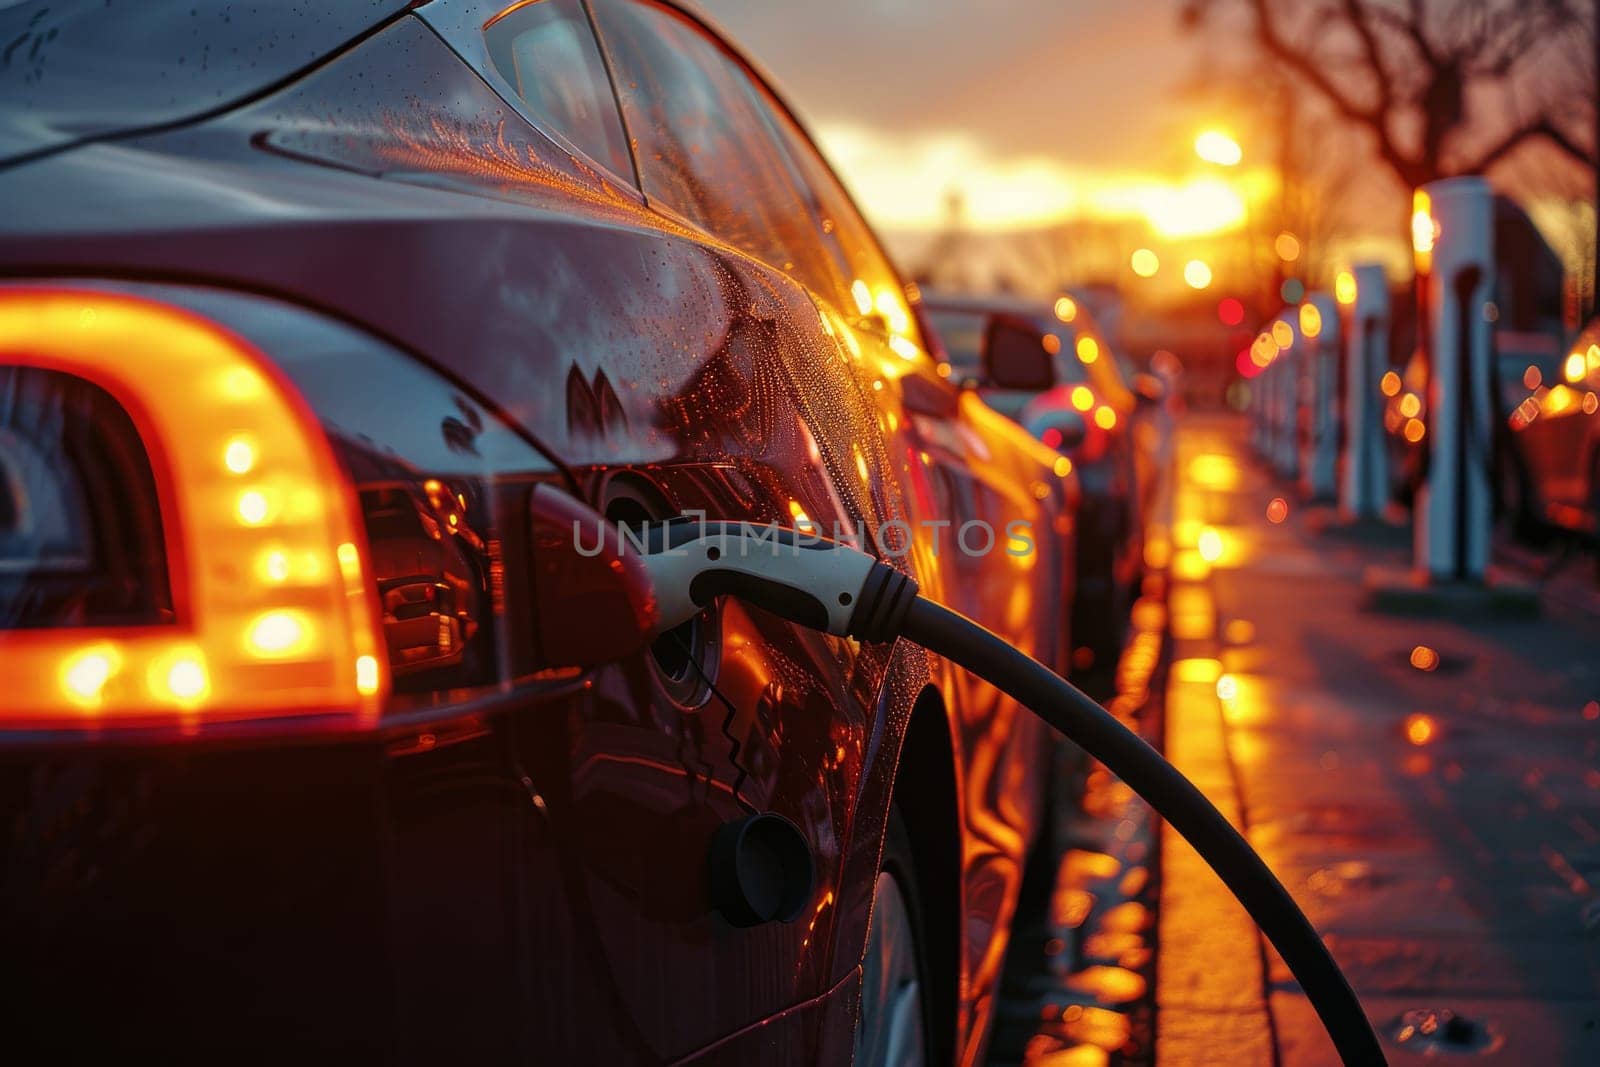 A red Tesla car is charging at a charging station. The car is surrounded by other cars, some of which are also charging. The scene is set at dusk, with the sun setting in the background